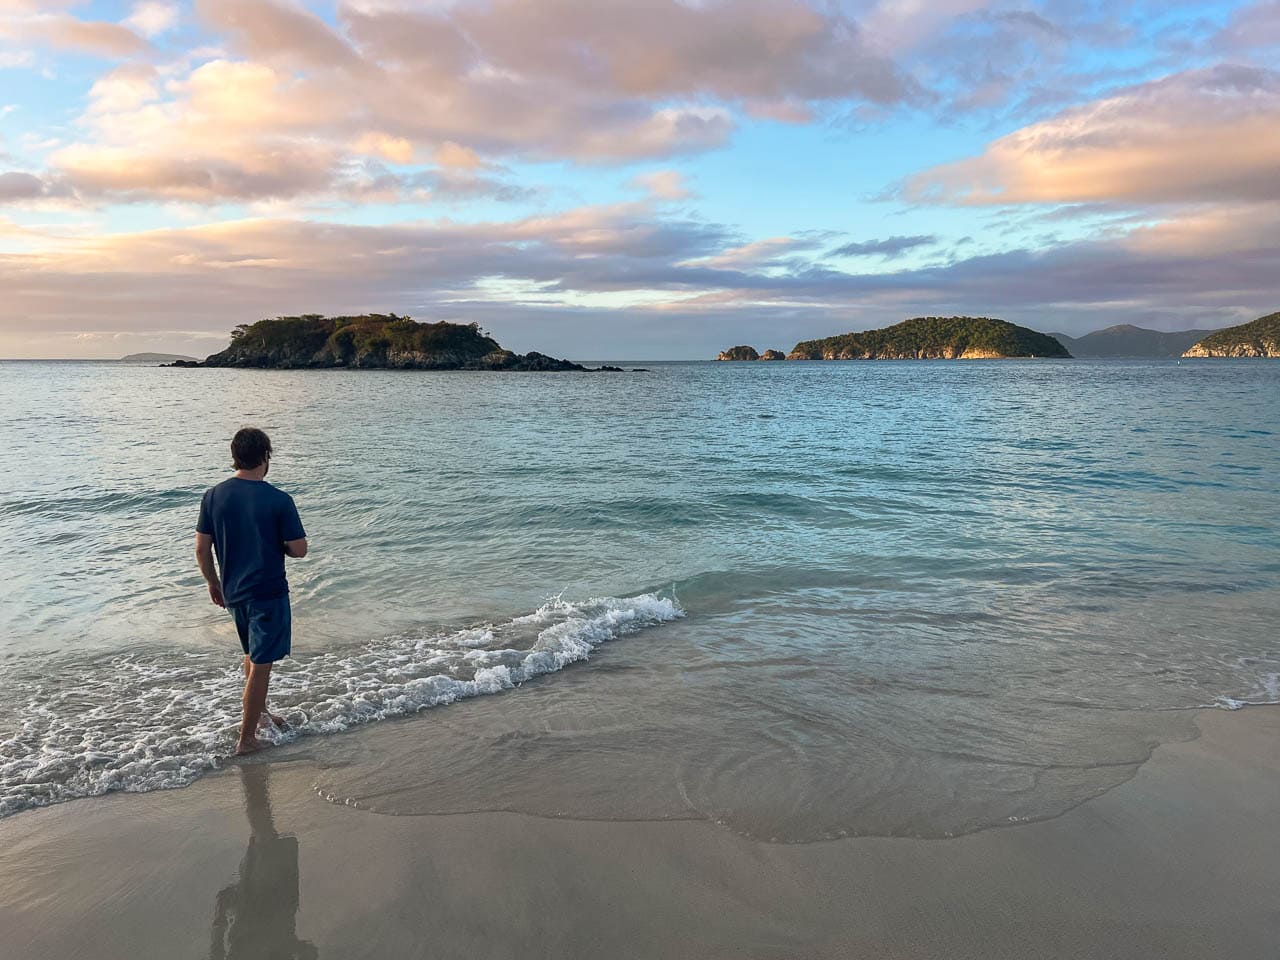 Visitor walking in the water on Cinnamon Bay Beach at sunset, Virgin Islands National Park